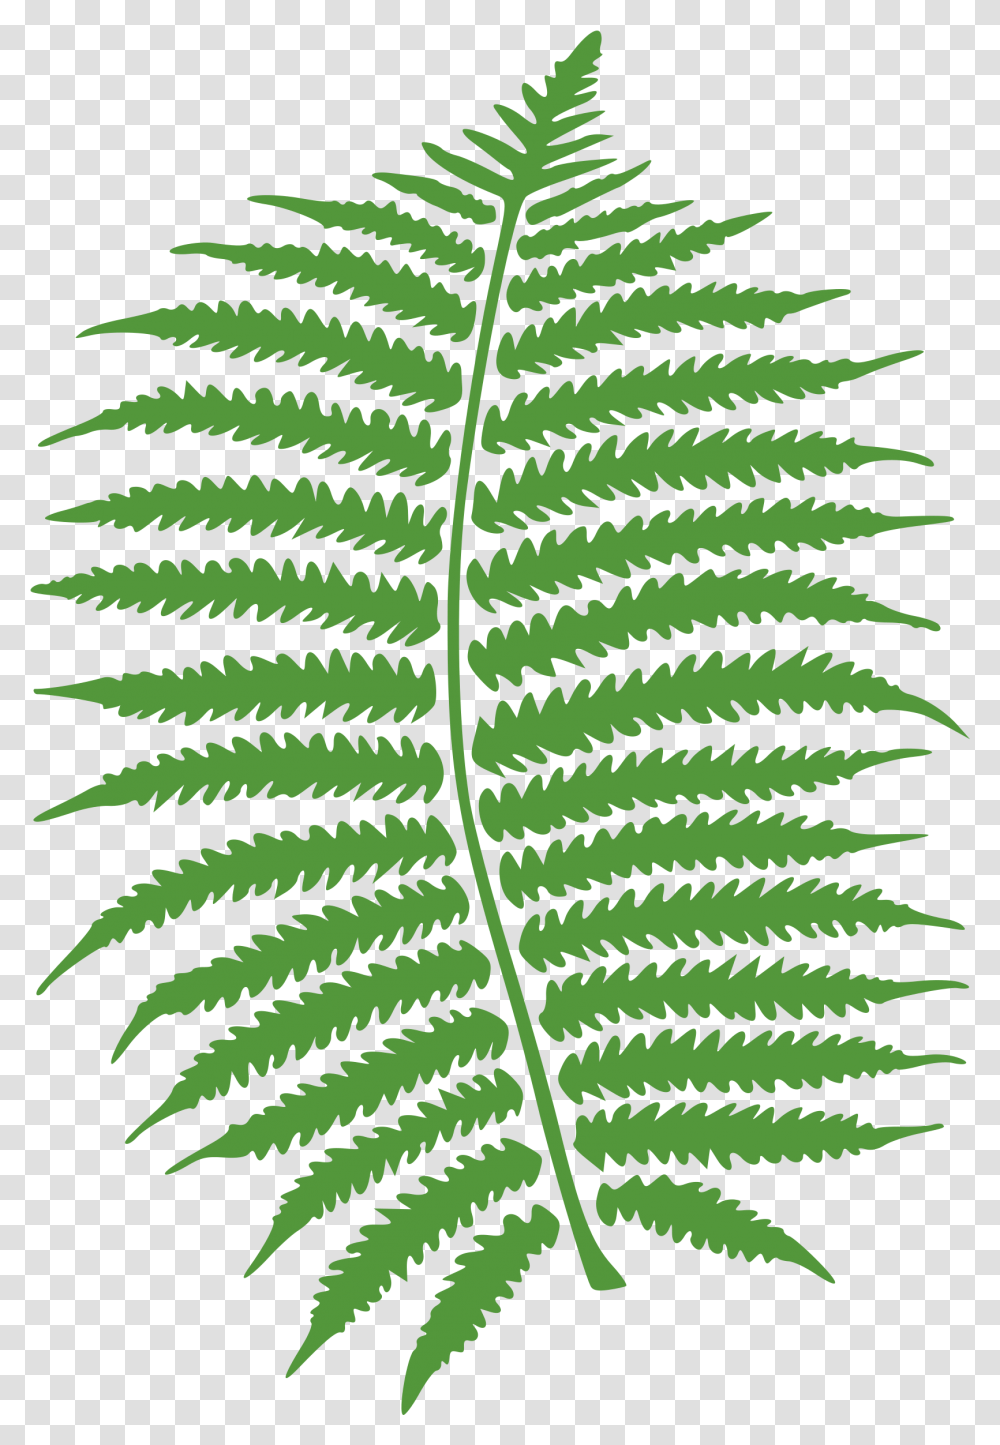 Download Hd Watercolor Vector Fern Fern Clipart Black And White, Plant Transparent Png